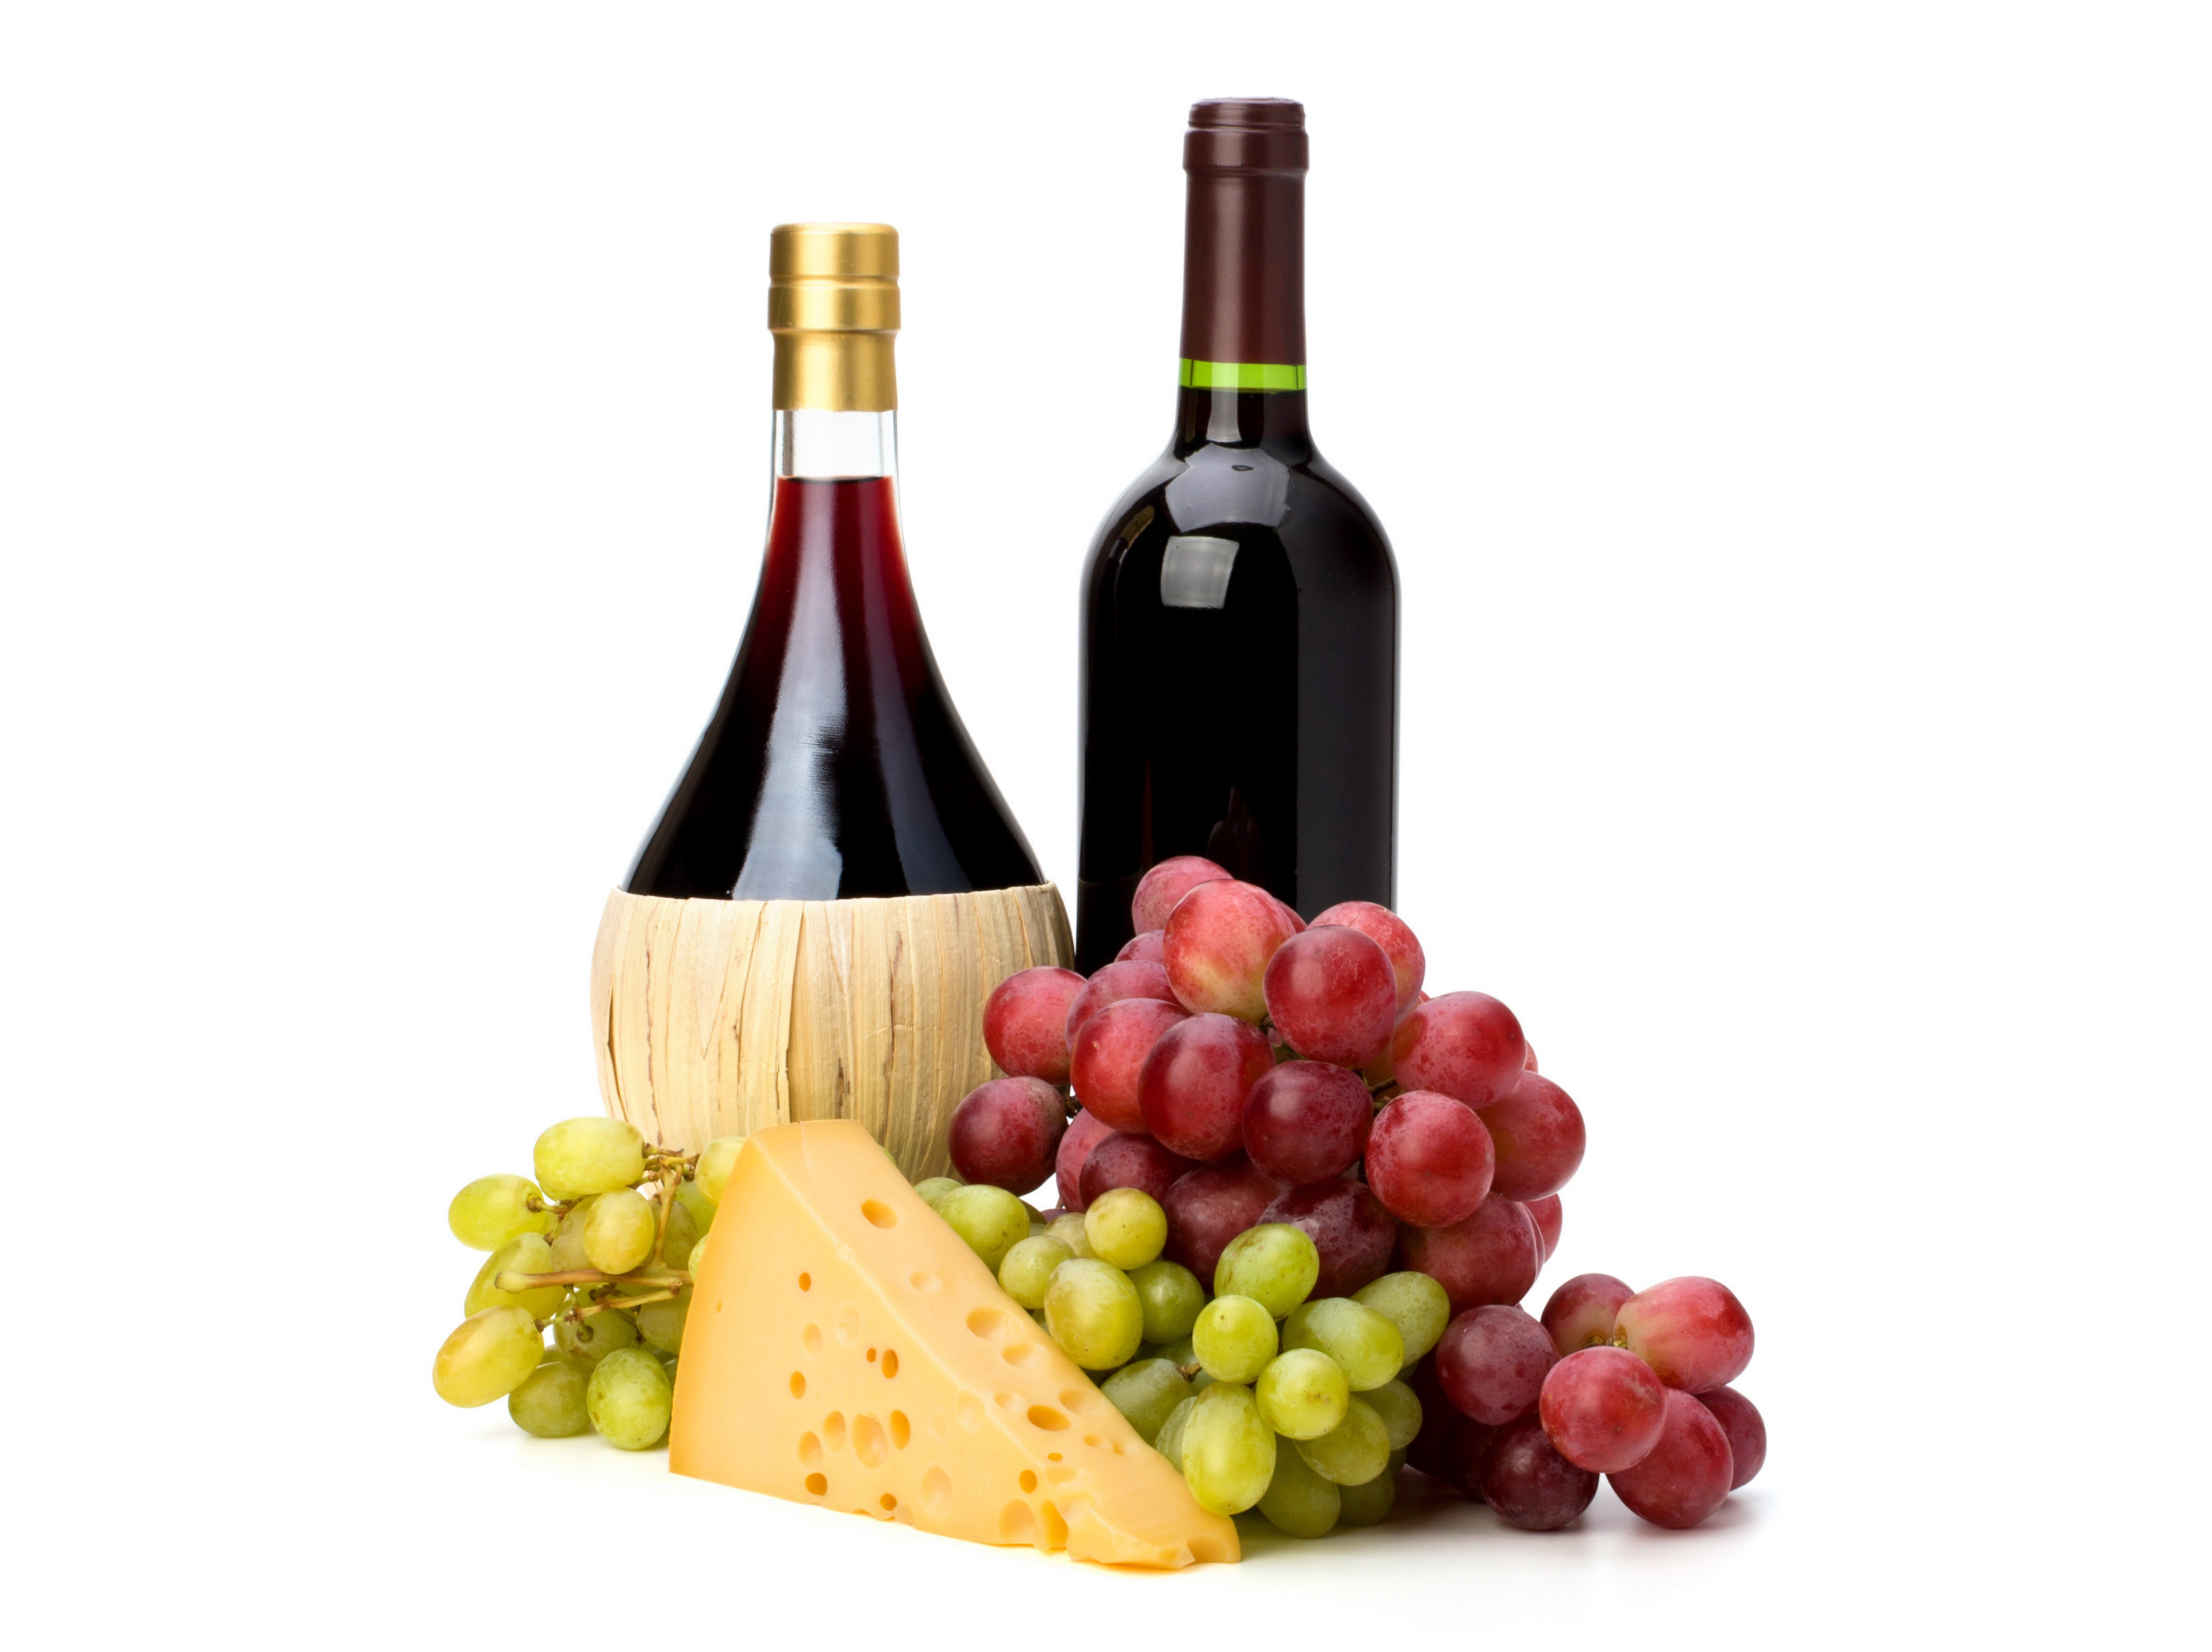 grapes, cheese and wine bottles, red